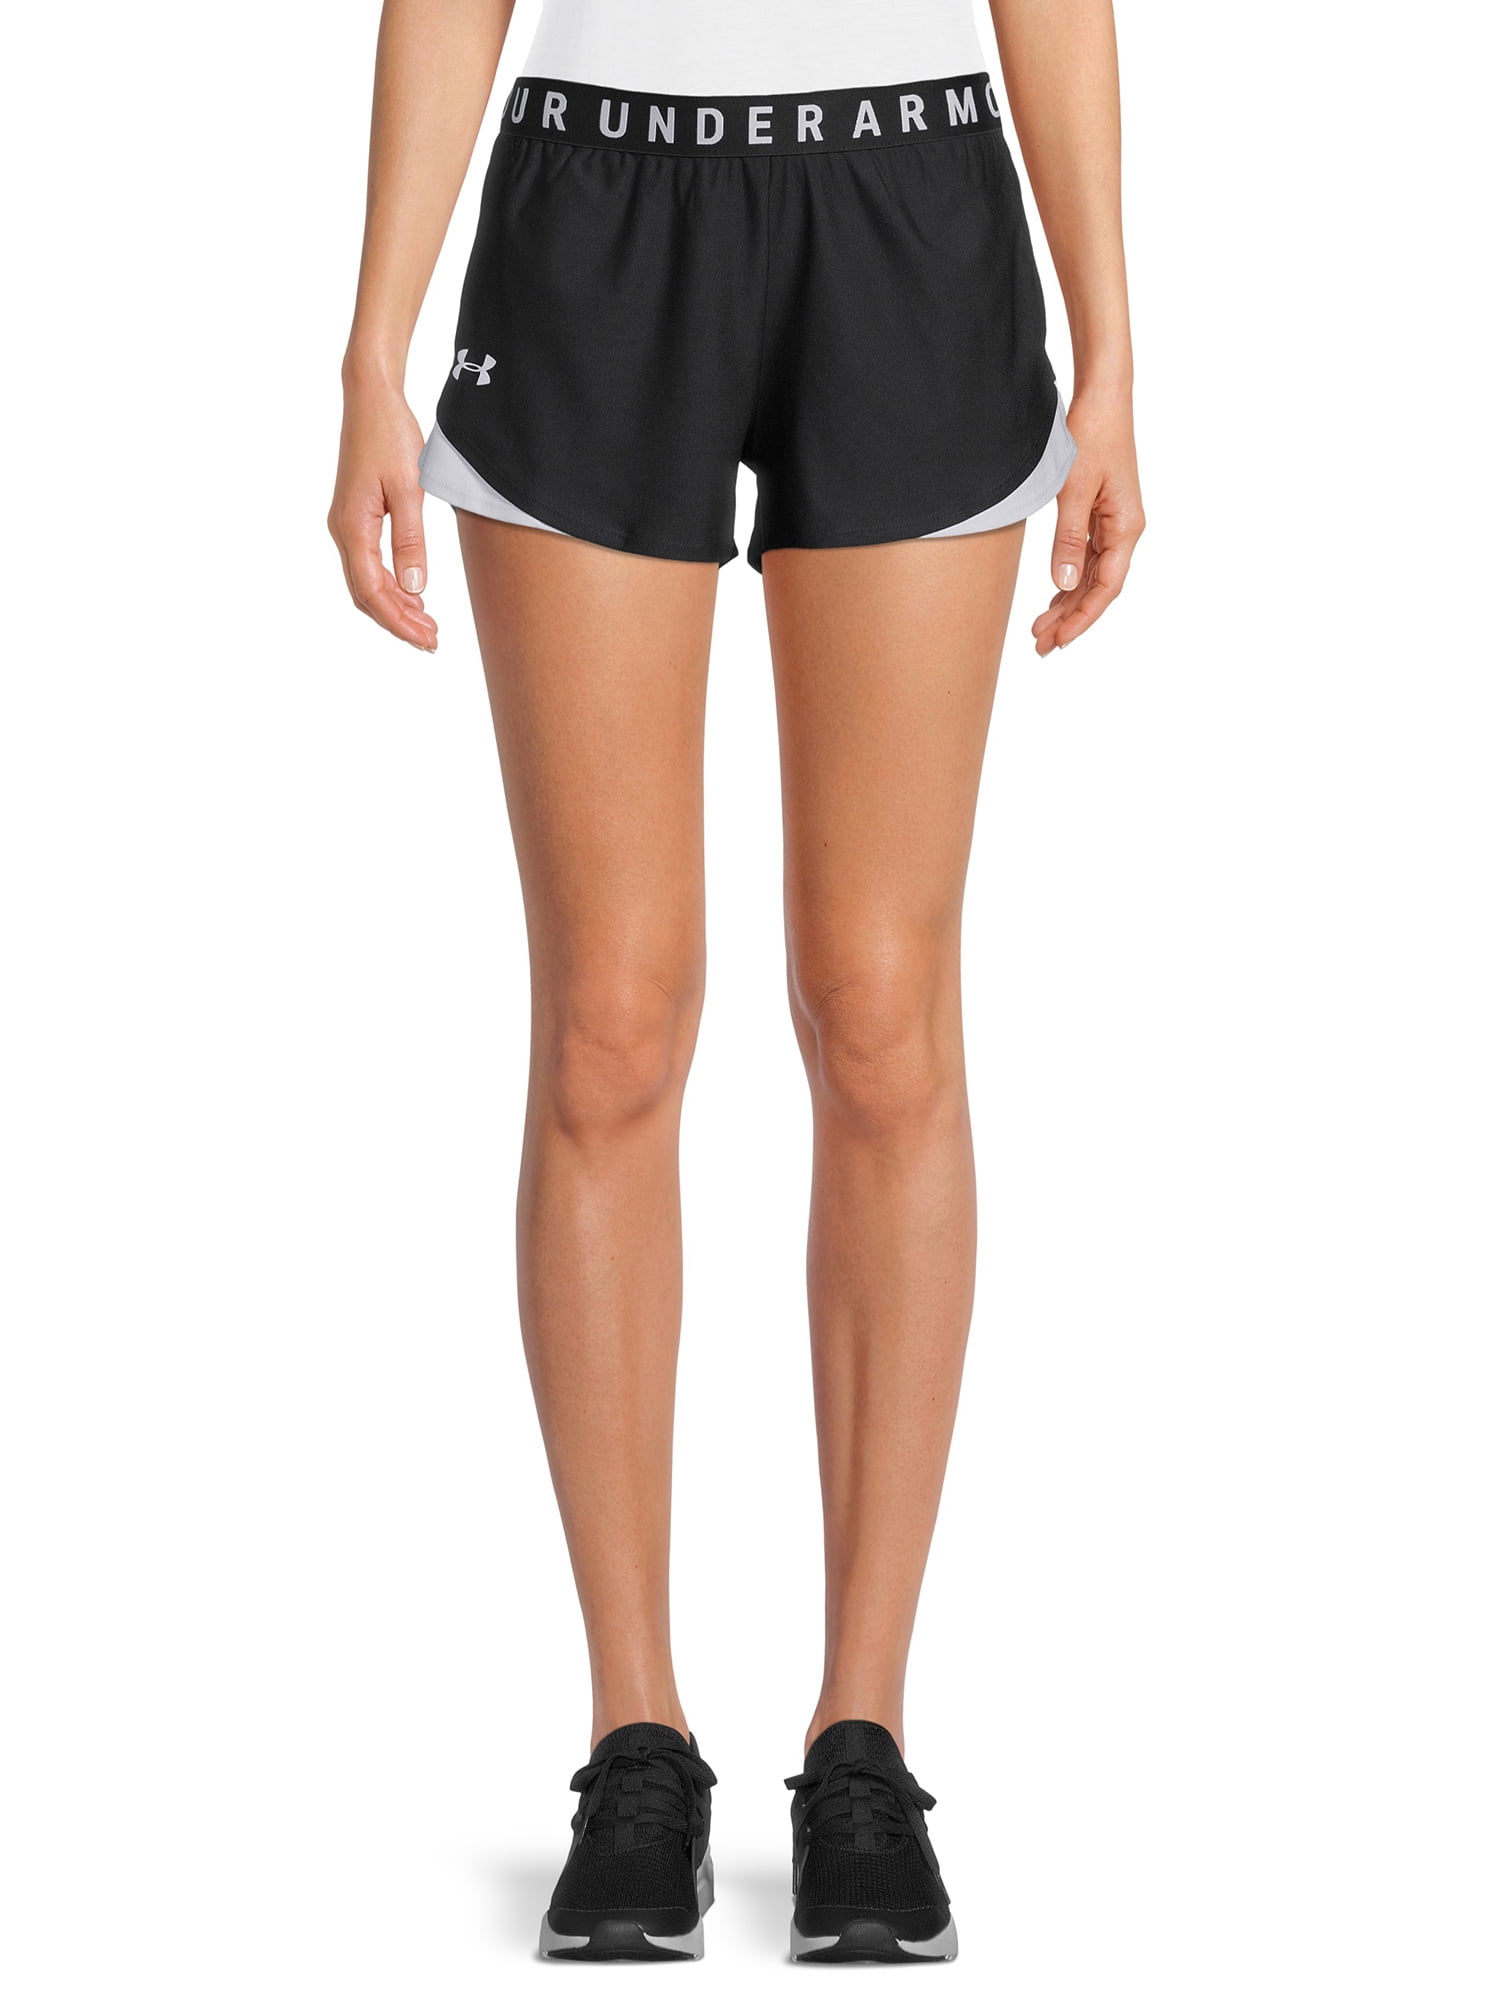 Under Armour Play Up 3.0 Black Shorts Women's Size XL New - beyond